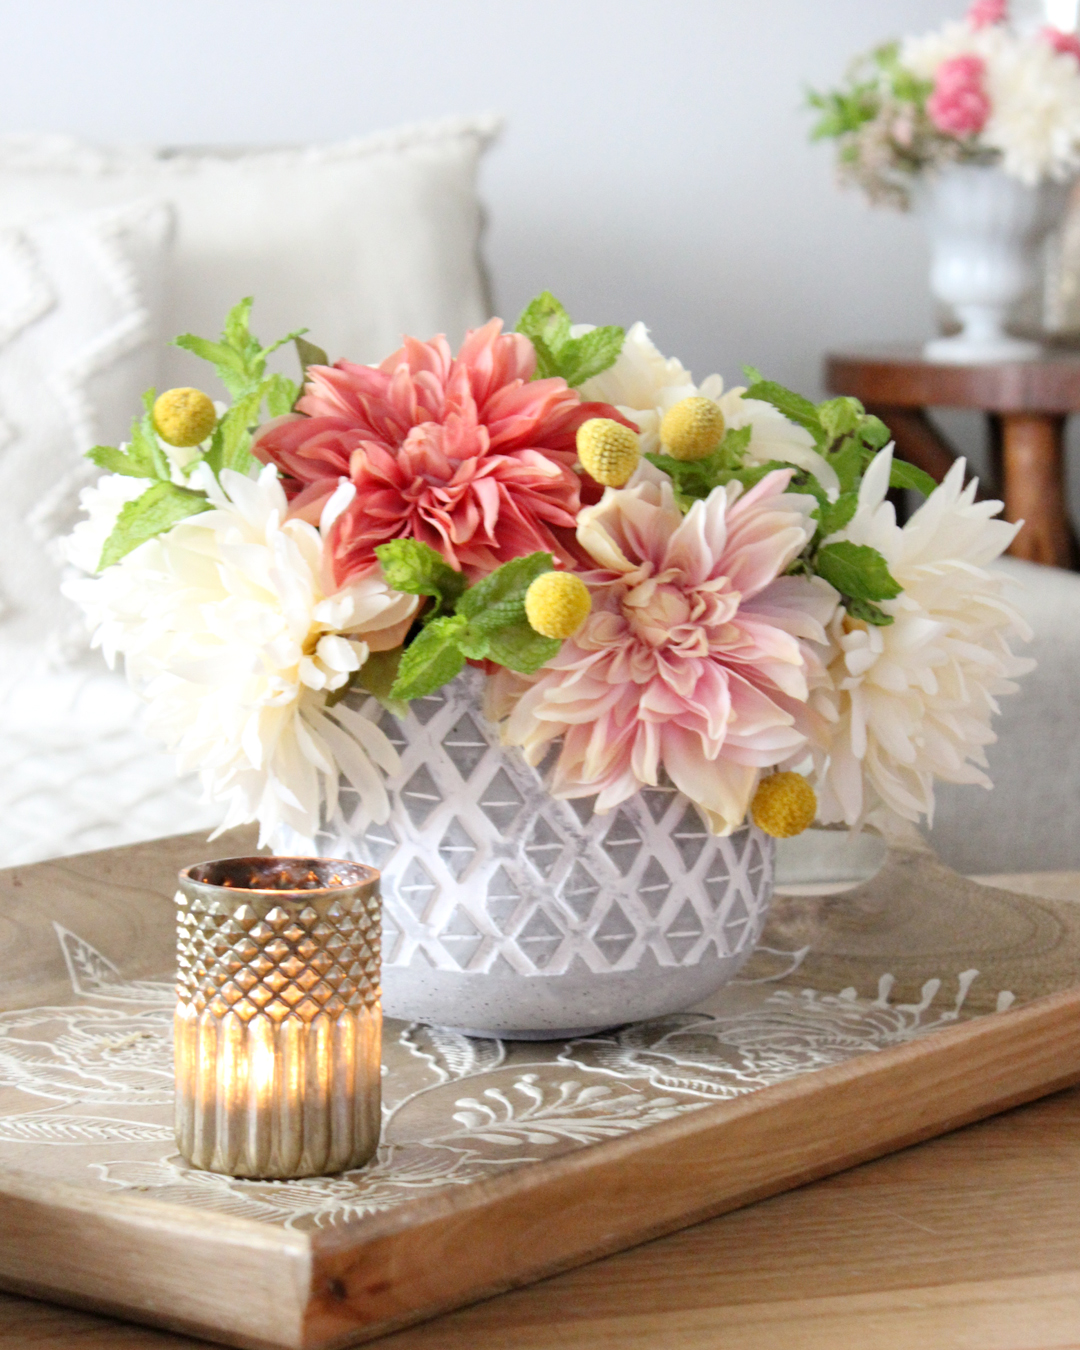 4 Simple Faux Flower Tips For A Fall Arrangement That Looks Fresh Tonality Designs